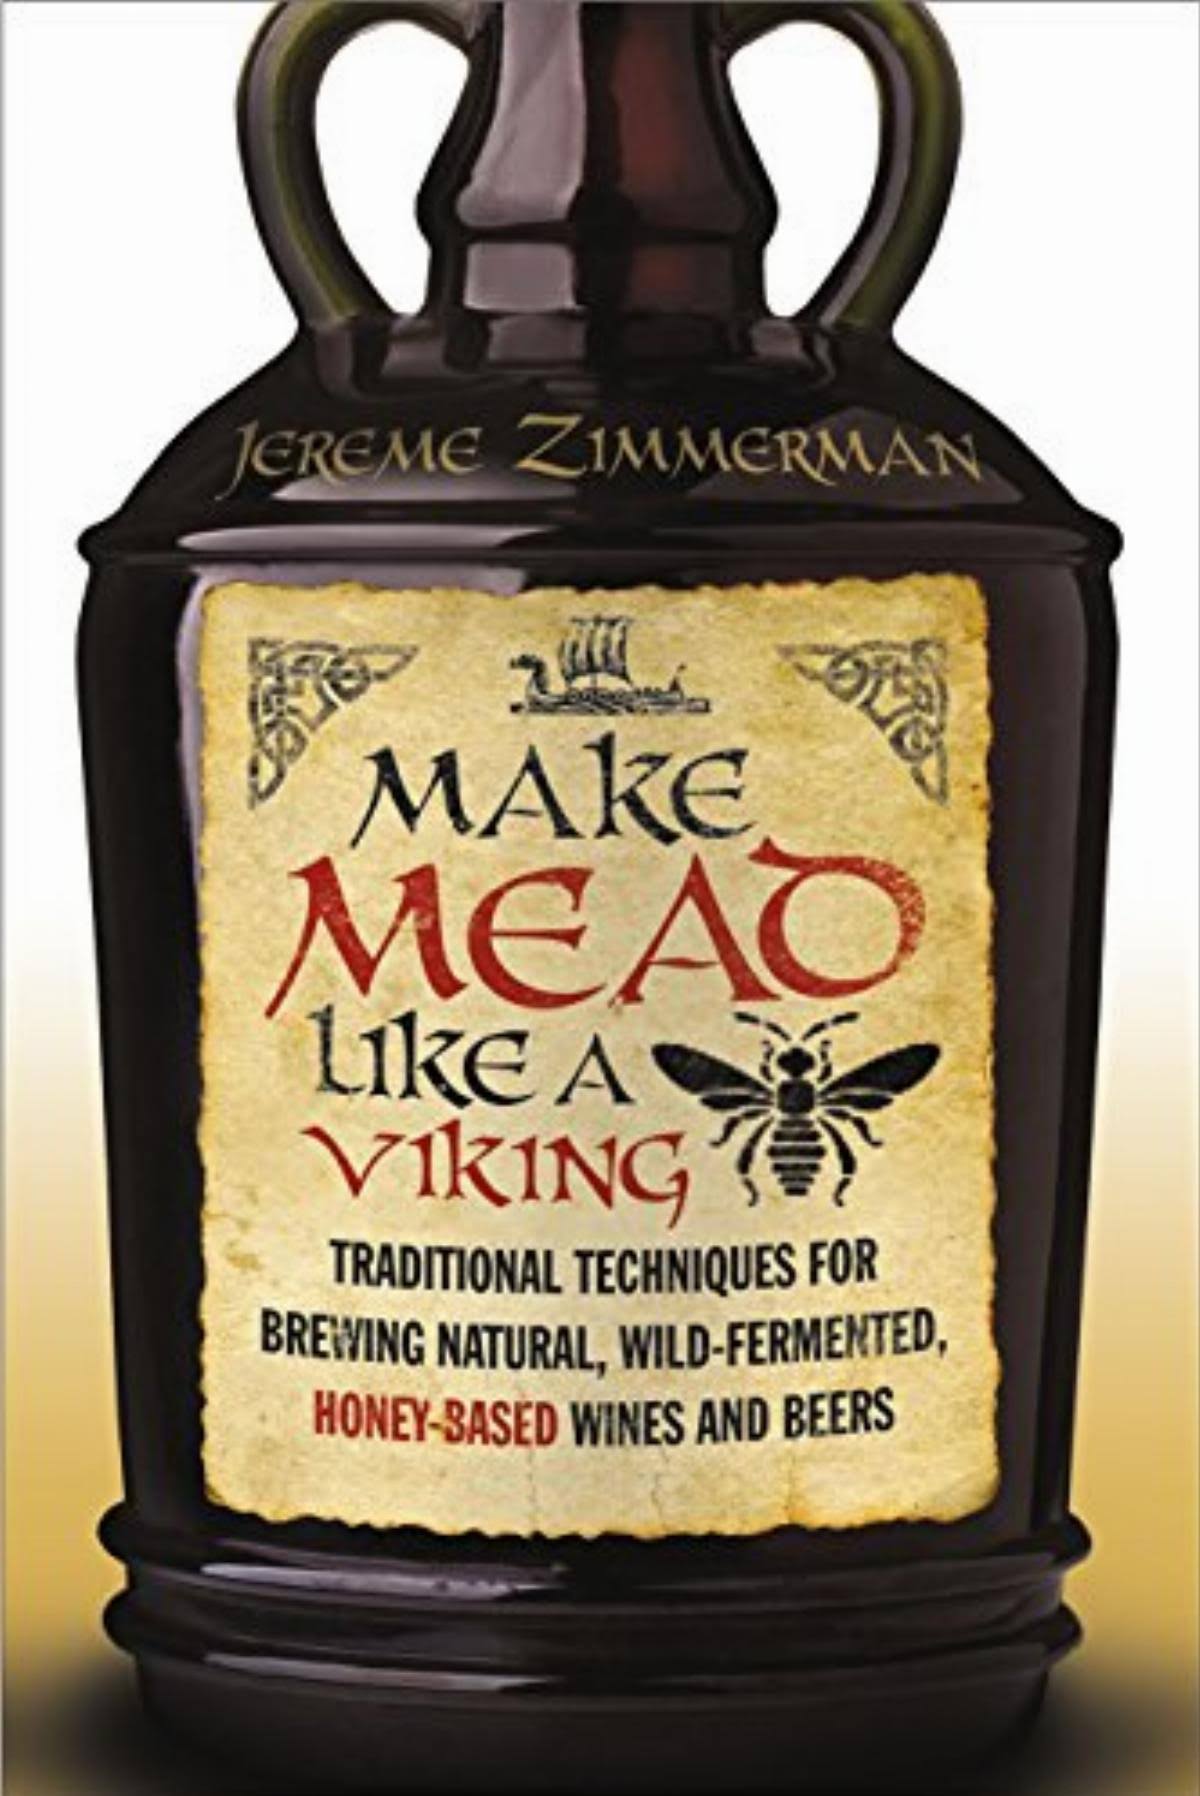 Make Mead Like a Viking: Traditional Techniques for Brewing Natural Wild Fermented Honey Based Wines and Beers - Jereme Zimmerman